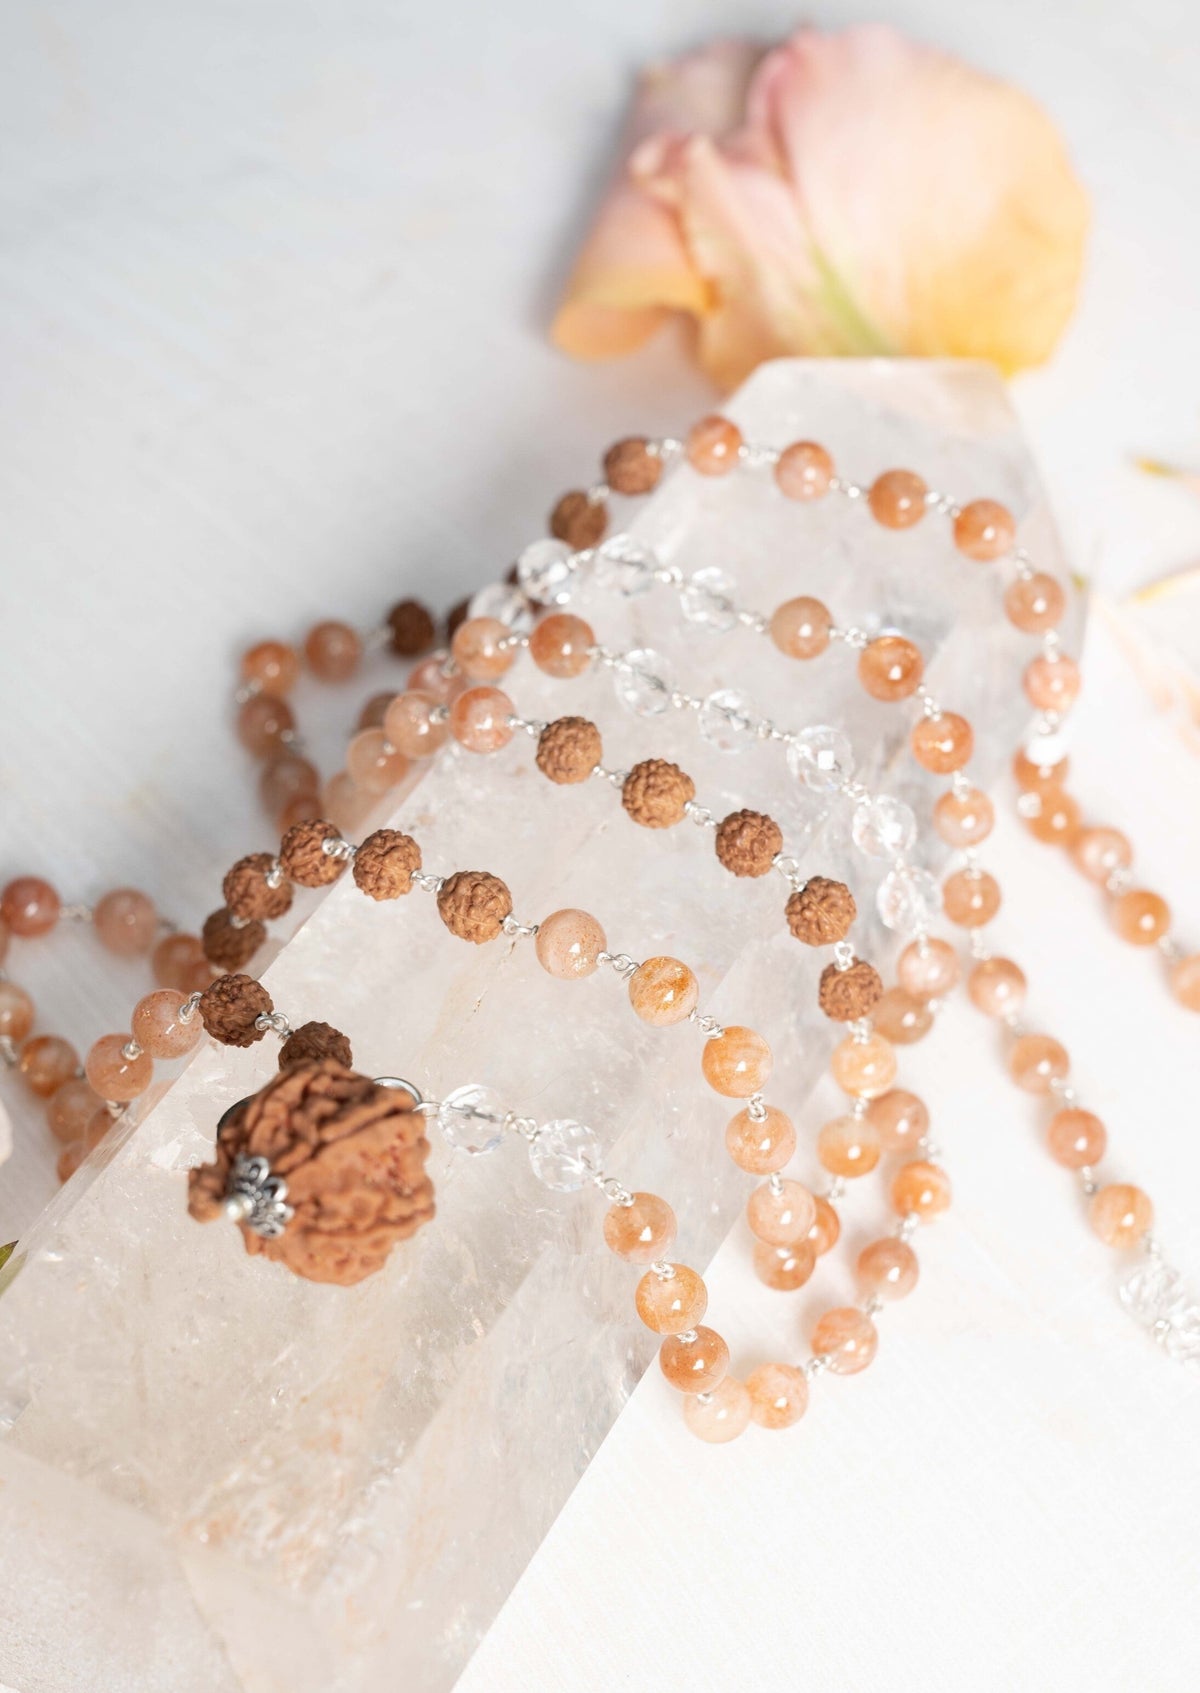 GANESH Sunstone Mala with Silver | All Blessings, Removes Obstacles, Clears the Path